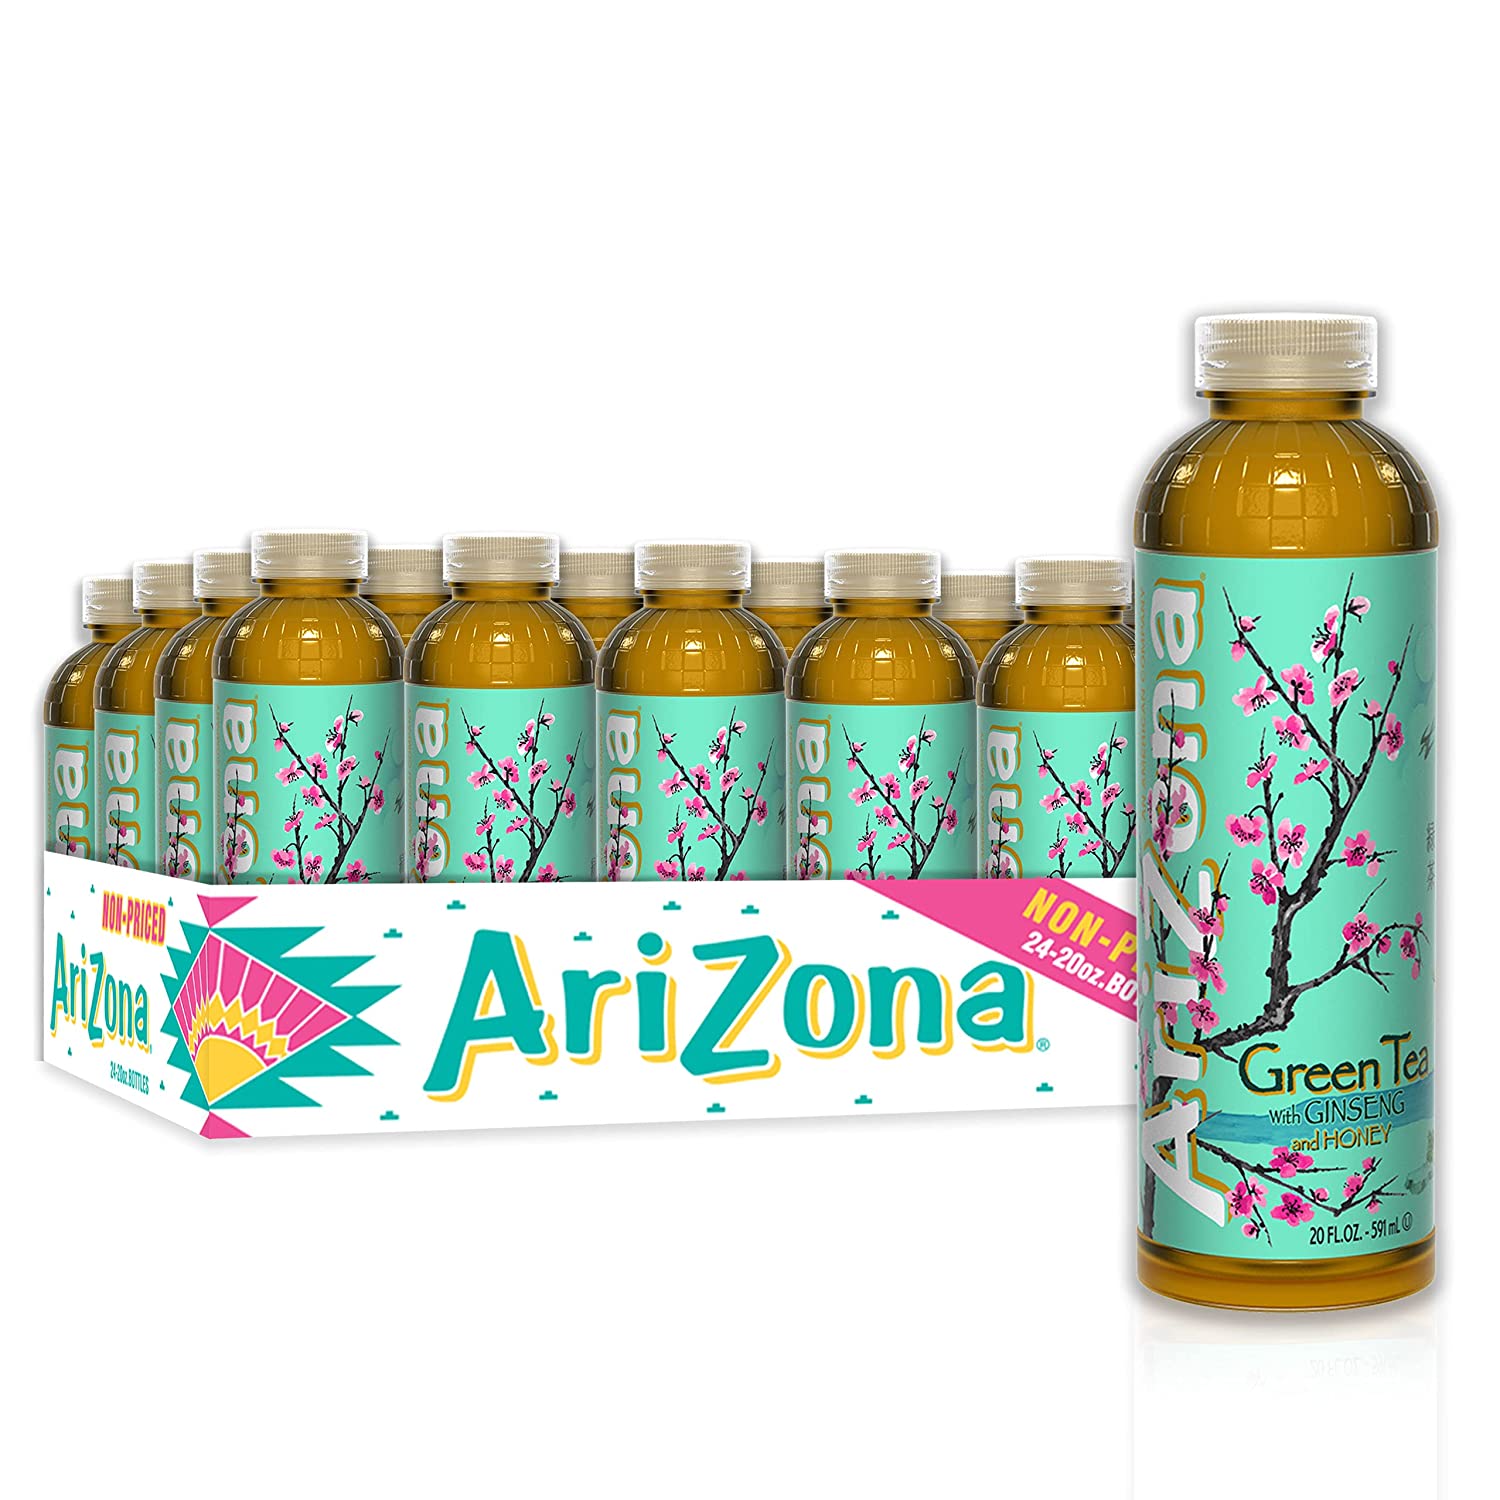 24-Pack 20-Oz AriZona Green Tea w/ Ginseng and Honey Bottles $21.24 + Free Shipping w/ Prime or on orders over $25